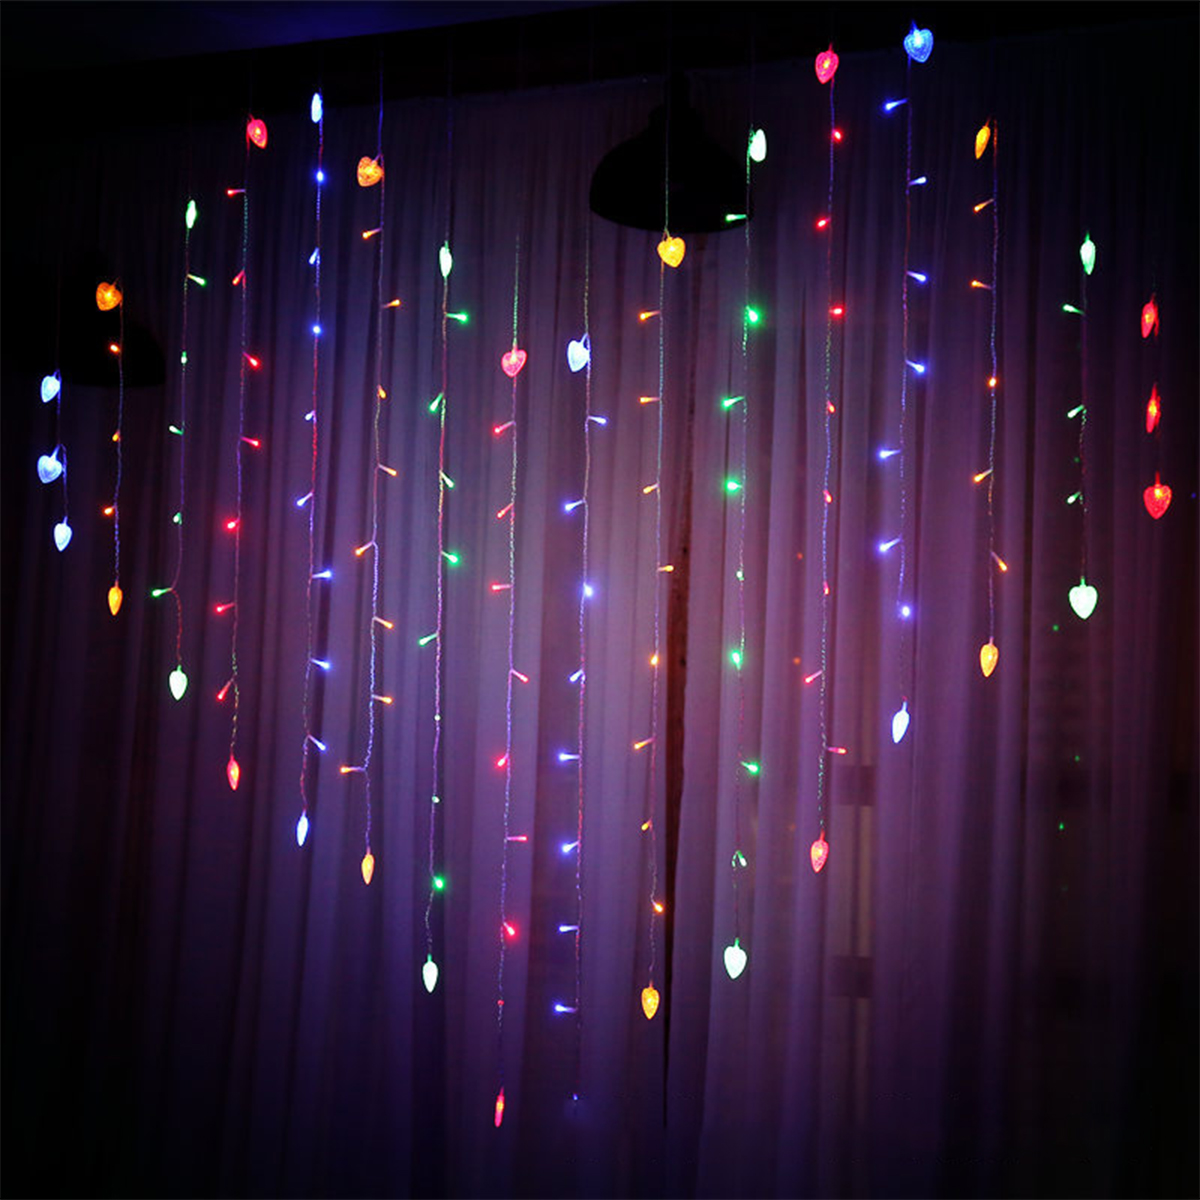 200X150cm-LED-LoveButterfly-Shape-Curtain-Lights-String-USB-Powered-Waterproof-Wall-Light-Hanging-Fa-1704556-2